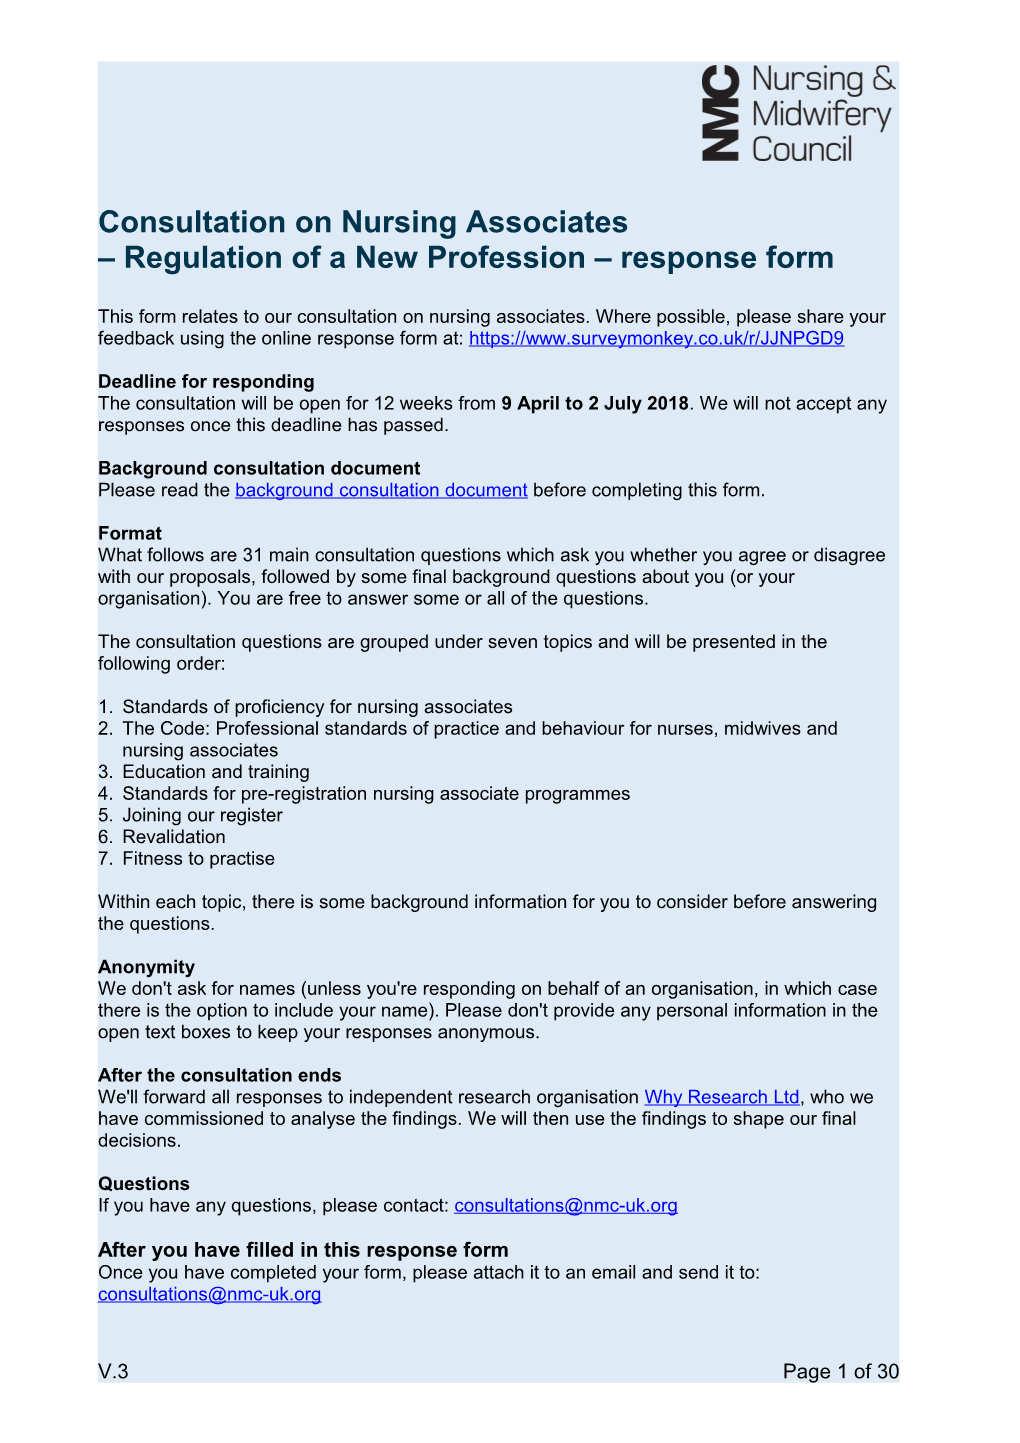 Regulation of a New Profession Response Form